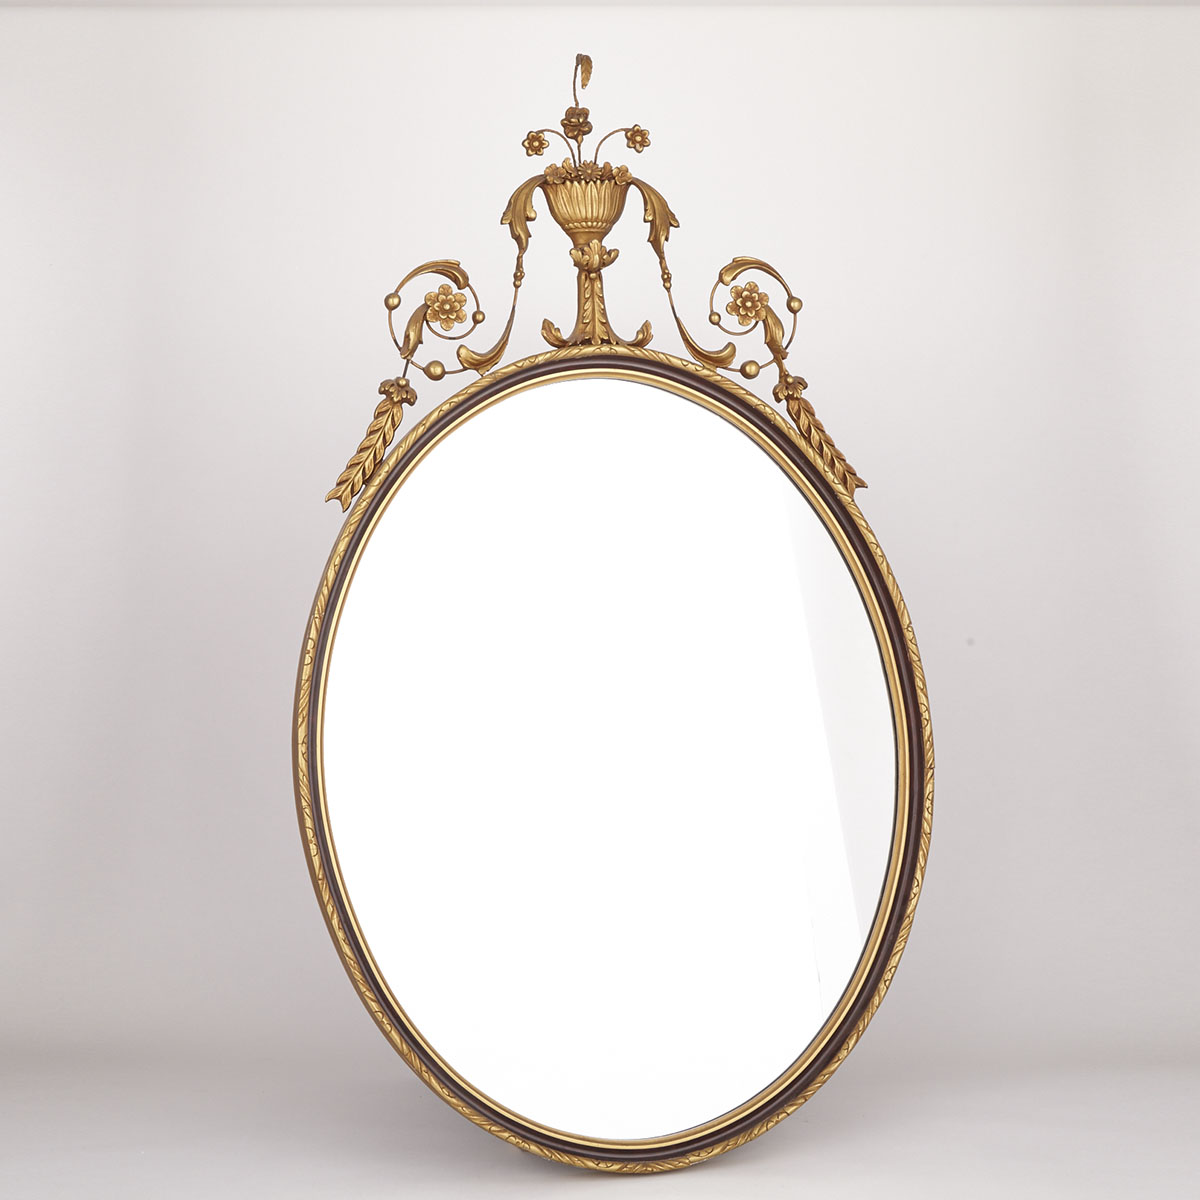 Neoclassical Giltwood Oval Hall Mirror, mid 20th century